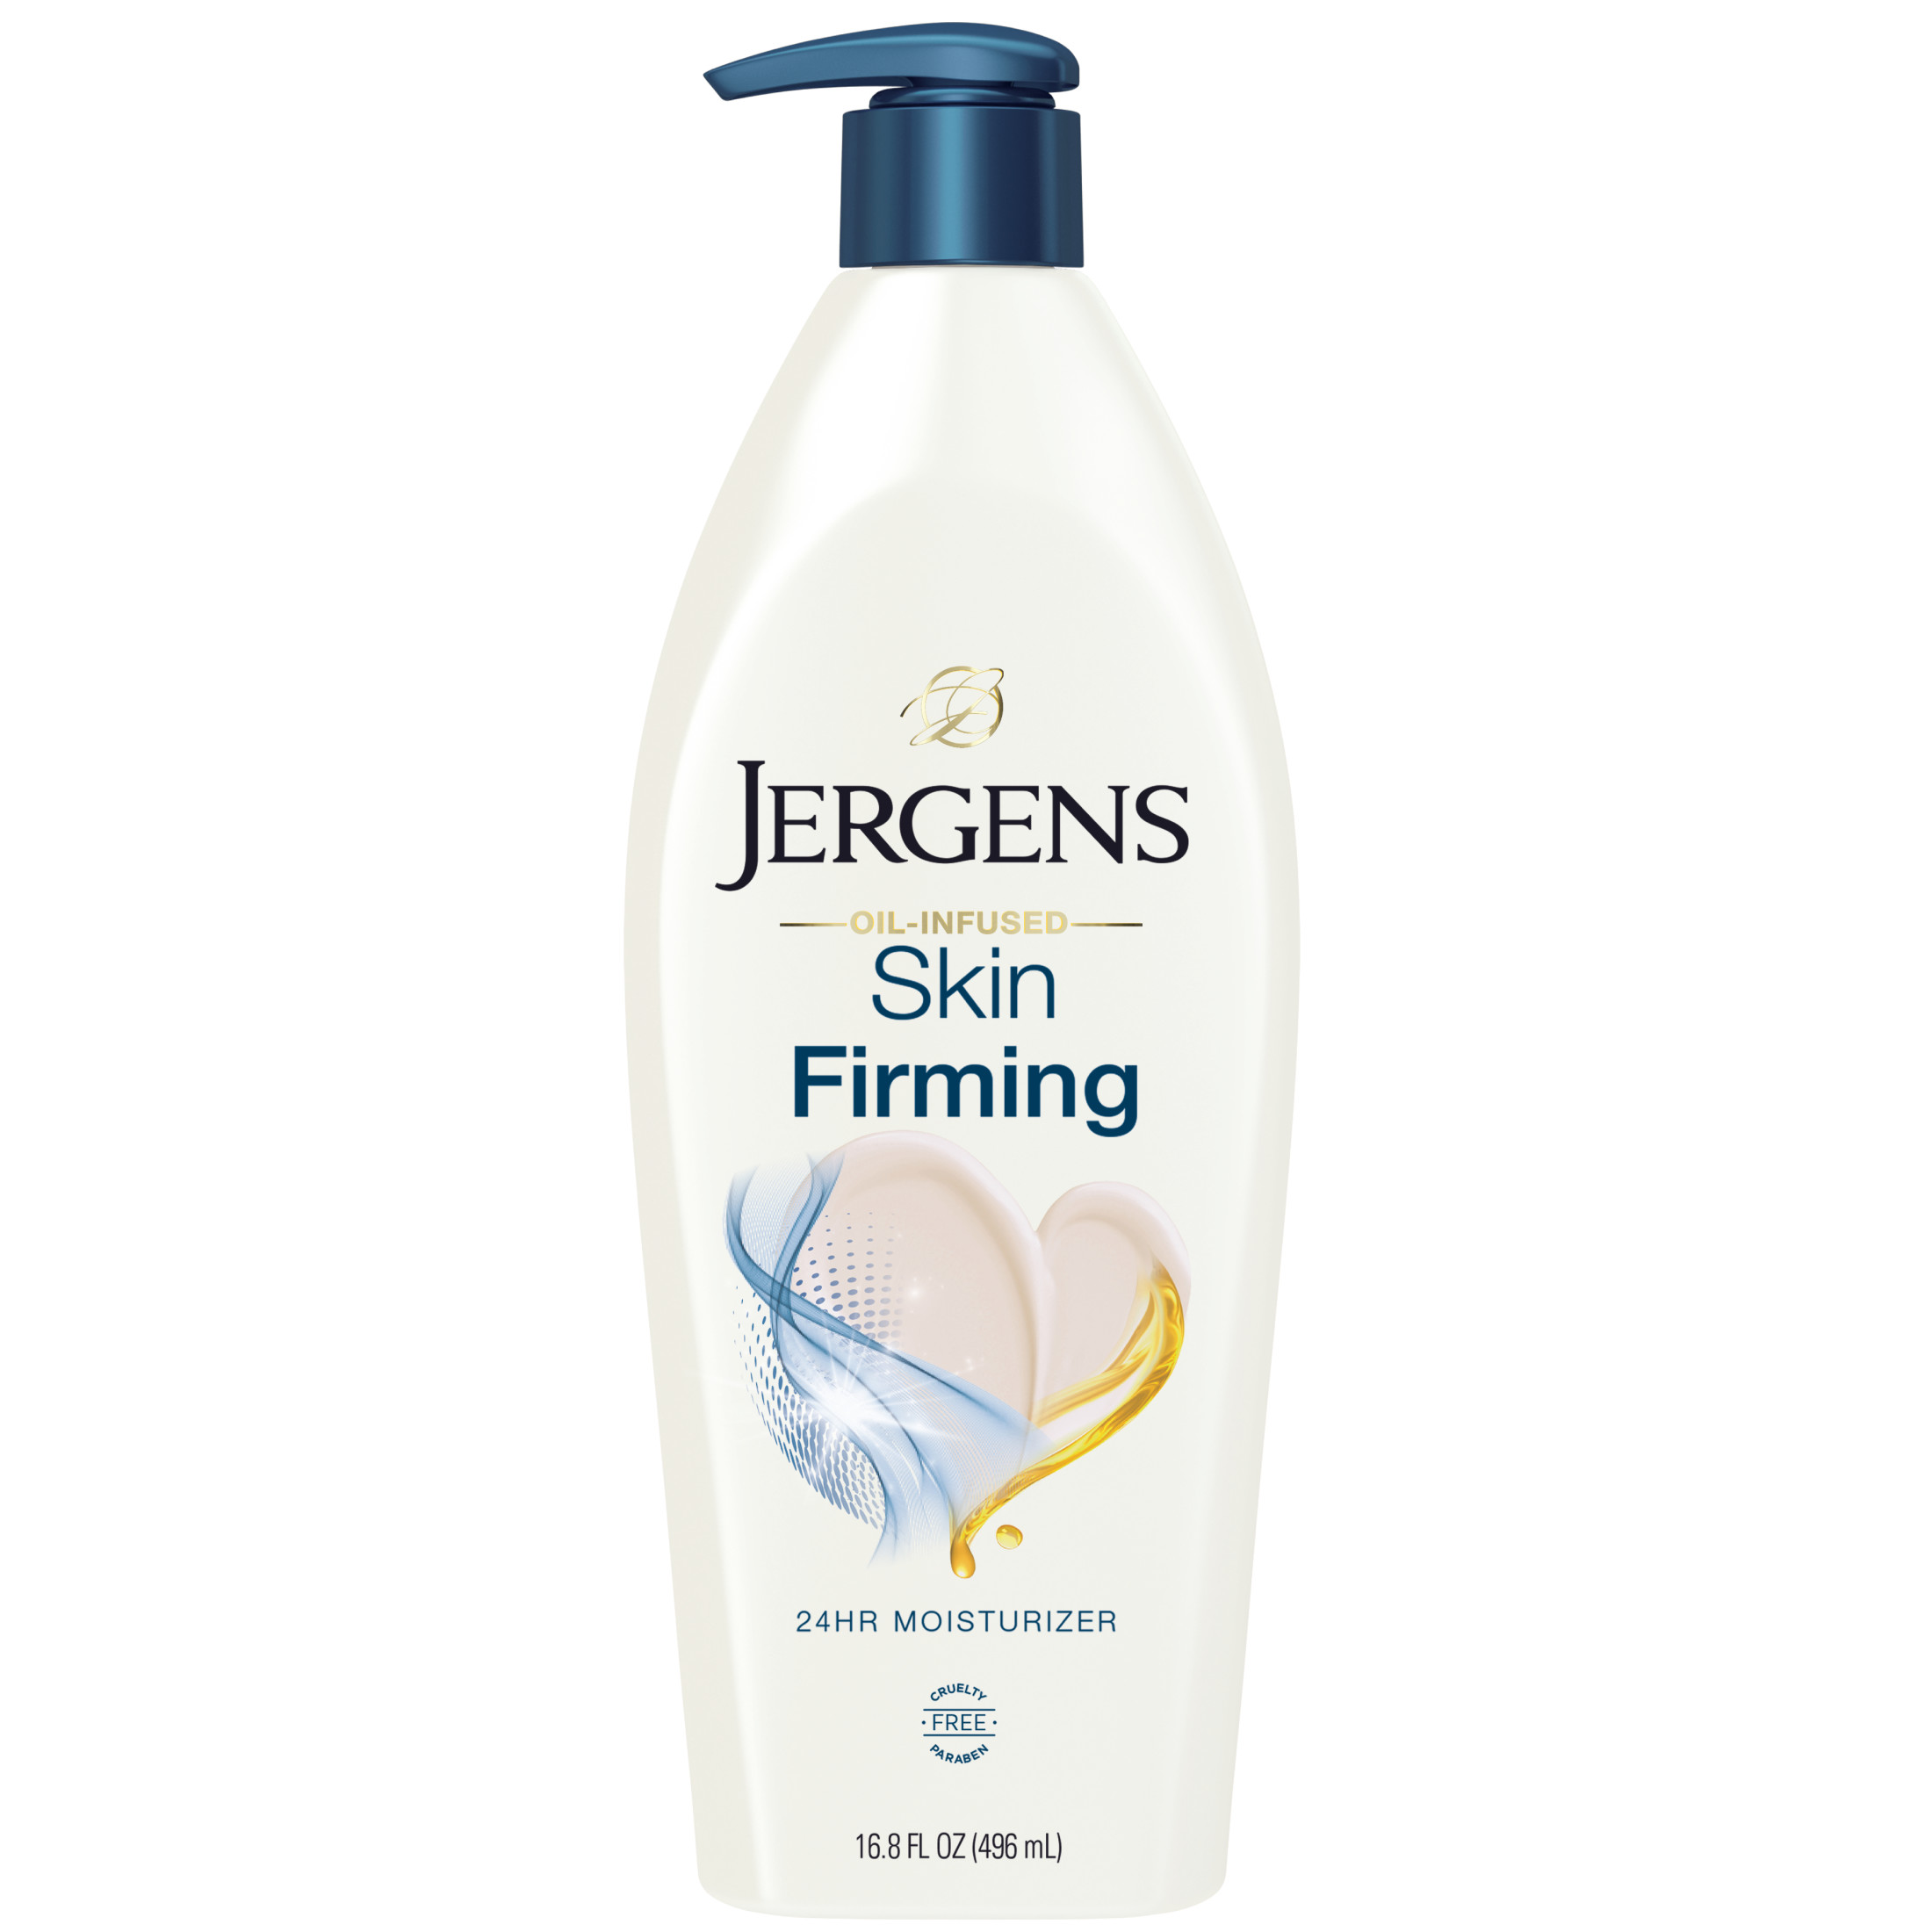 Jergens Hand and Body Lotion, Oil-Infused Skin Firming 24-Hour Body Lotion, 16.8 Oz - image 1 of 11